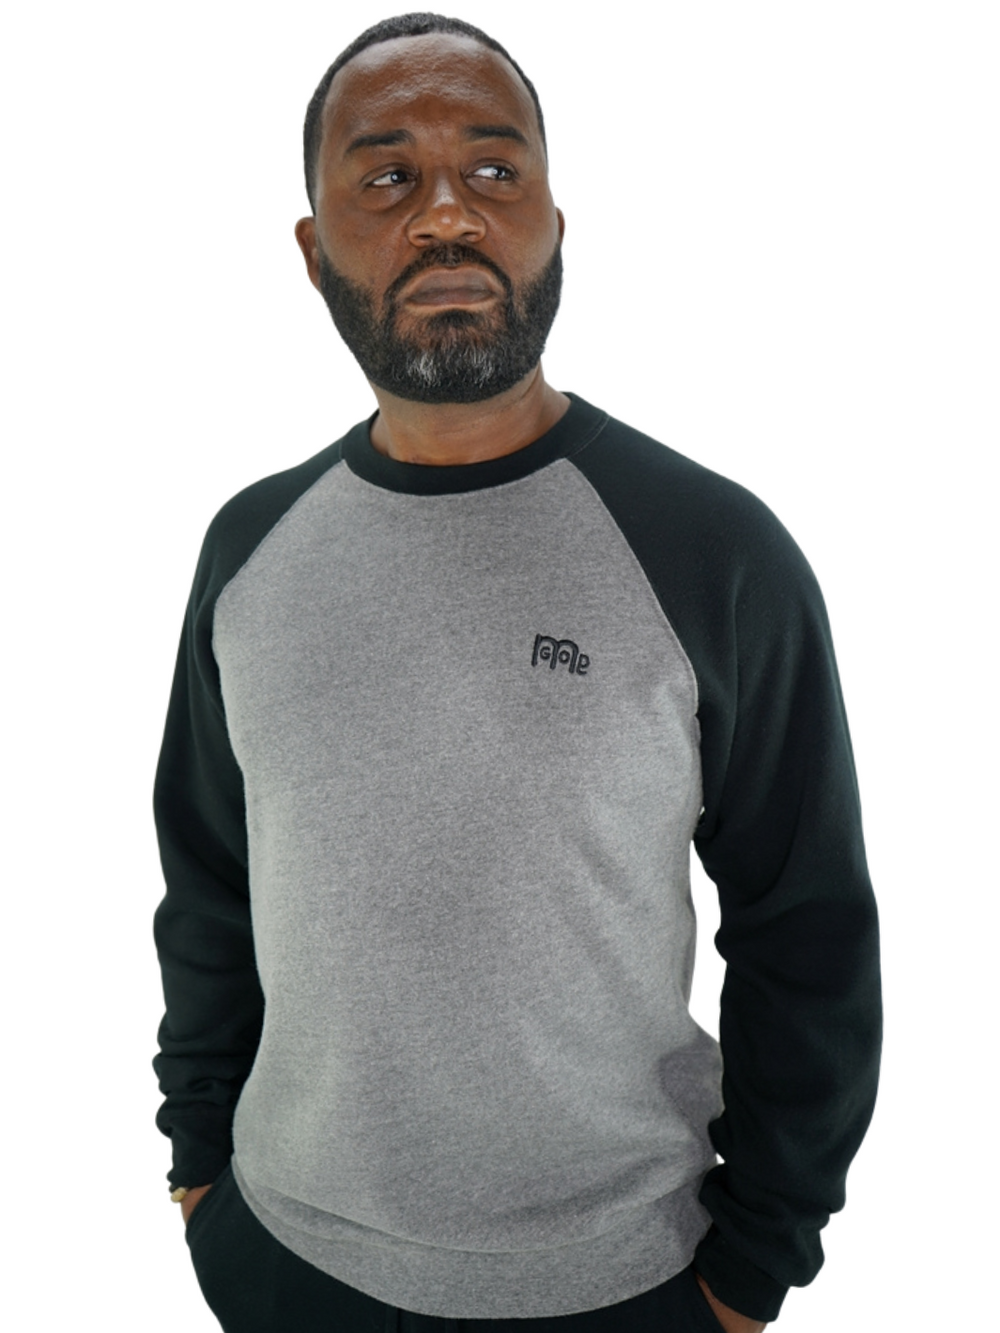 GODinme Crewneck Sweater; luxurious comfort,  Grey with Black raglan sleeves and embroidered GODinme logo at left chest.